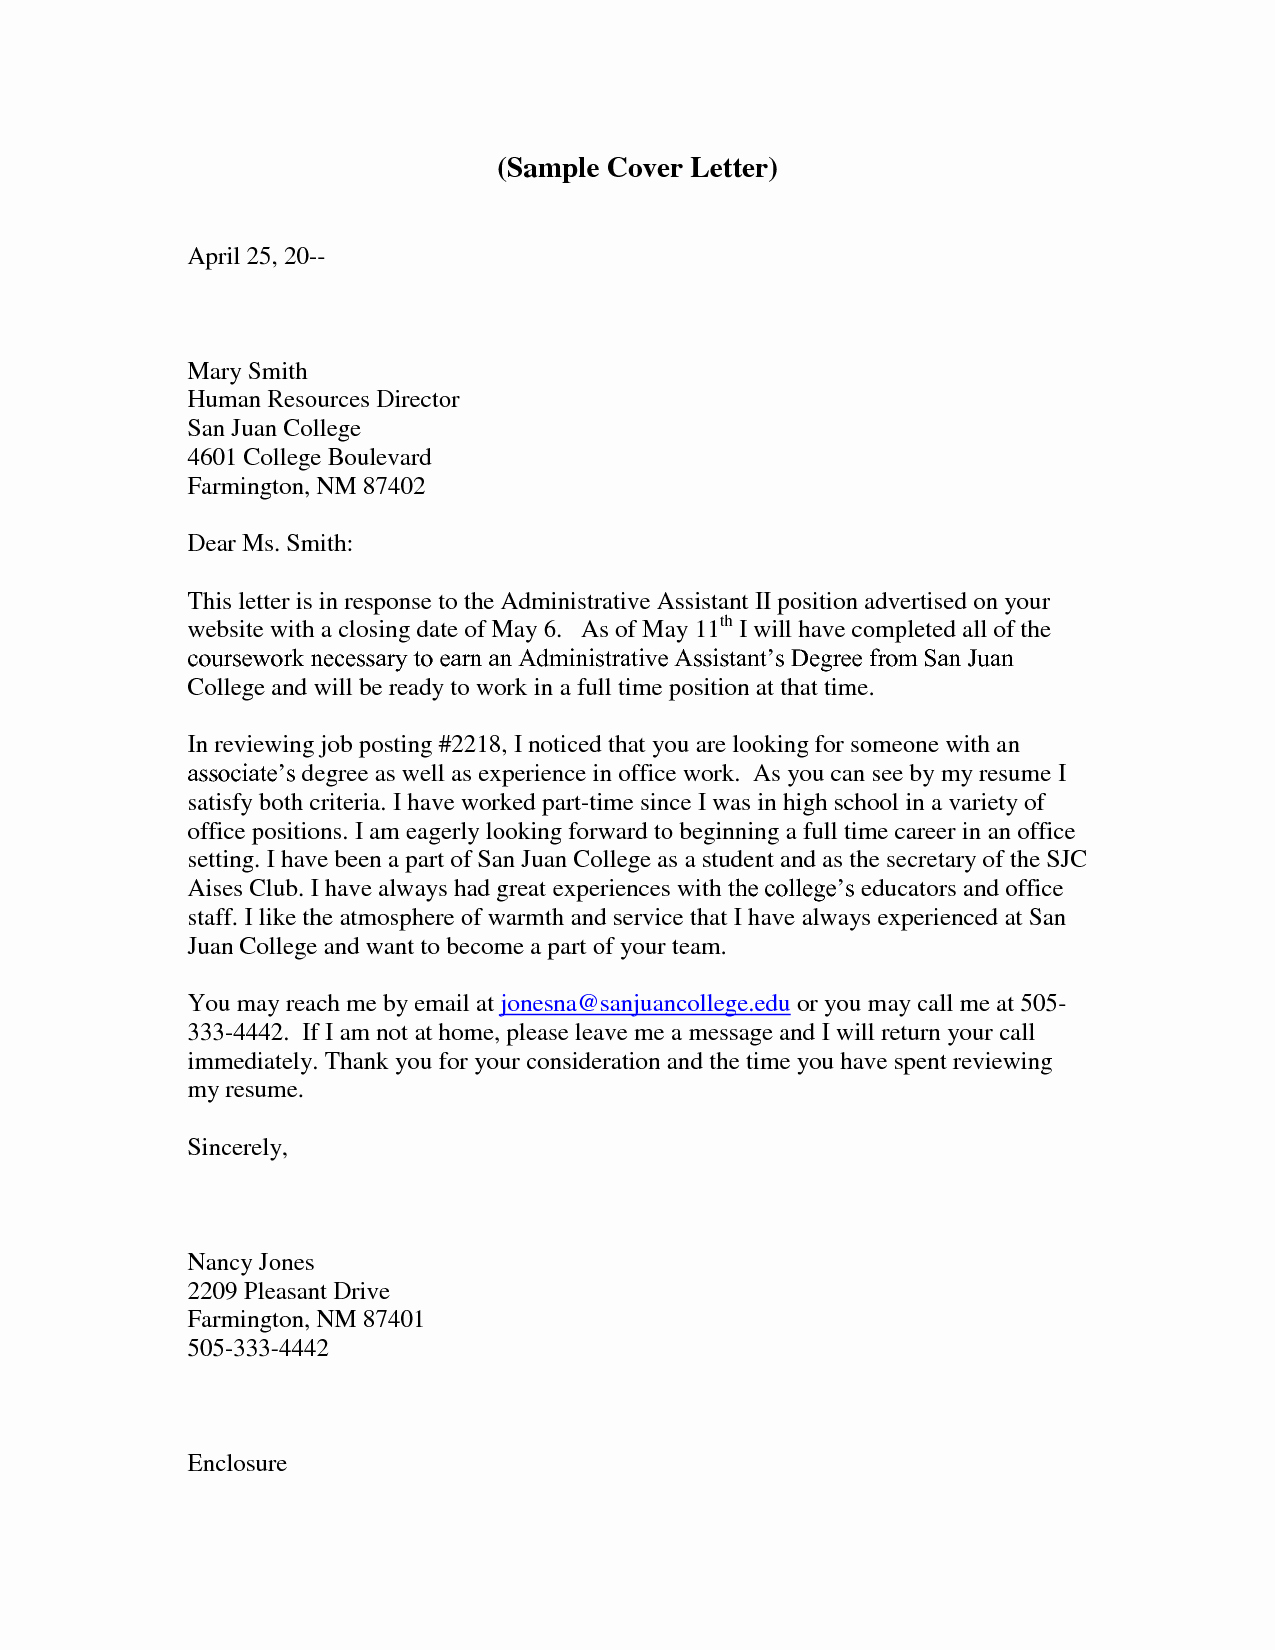 Cover Letter for Administrative Position Fresh Administrative assistant Cover Letter Cover Letter for